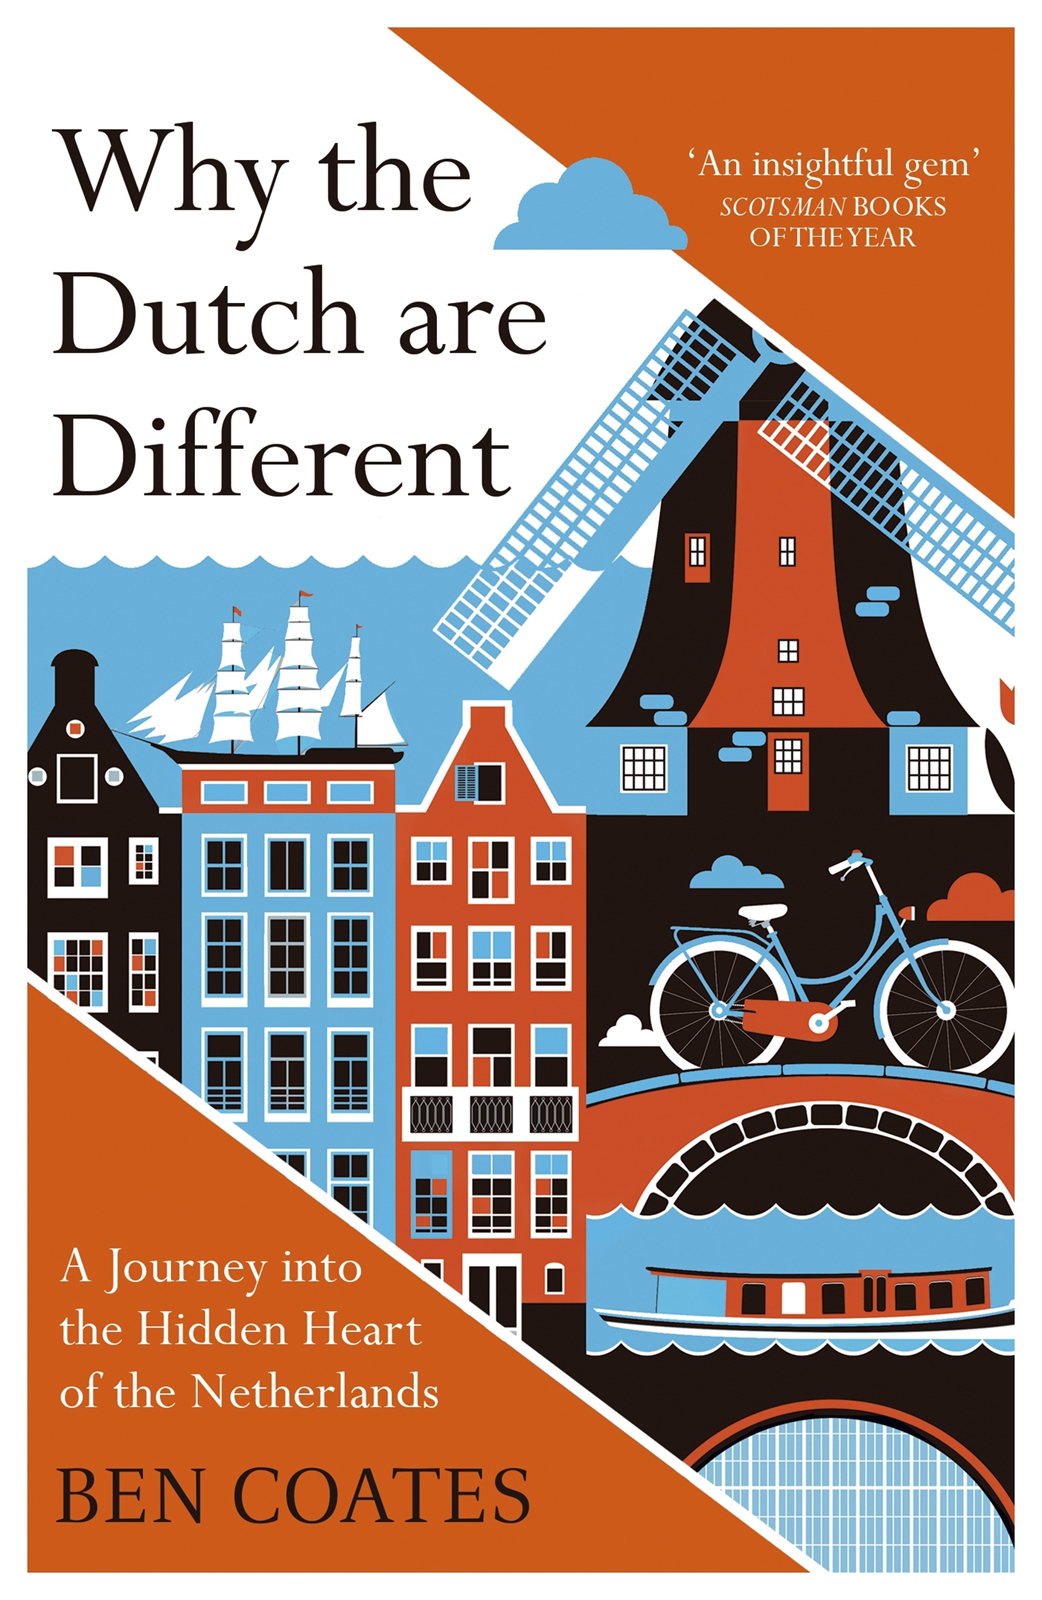 Why the Dutch Are Different by Ben Coates